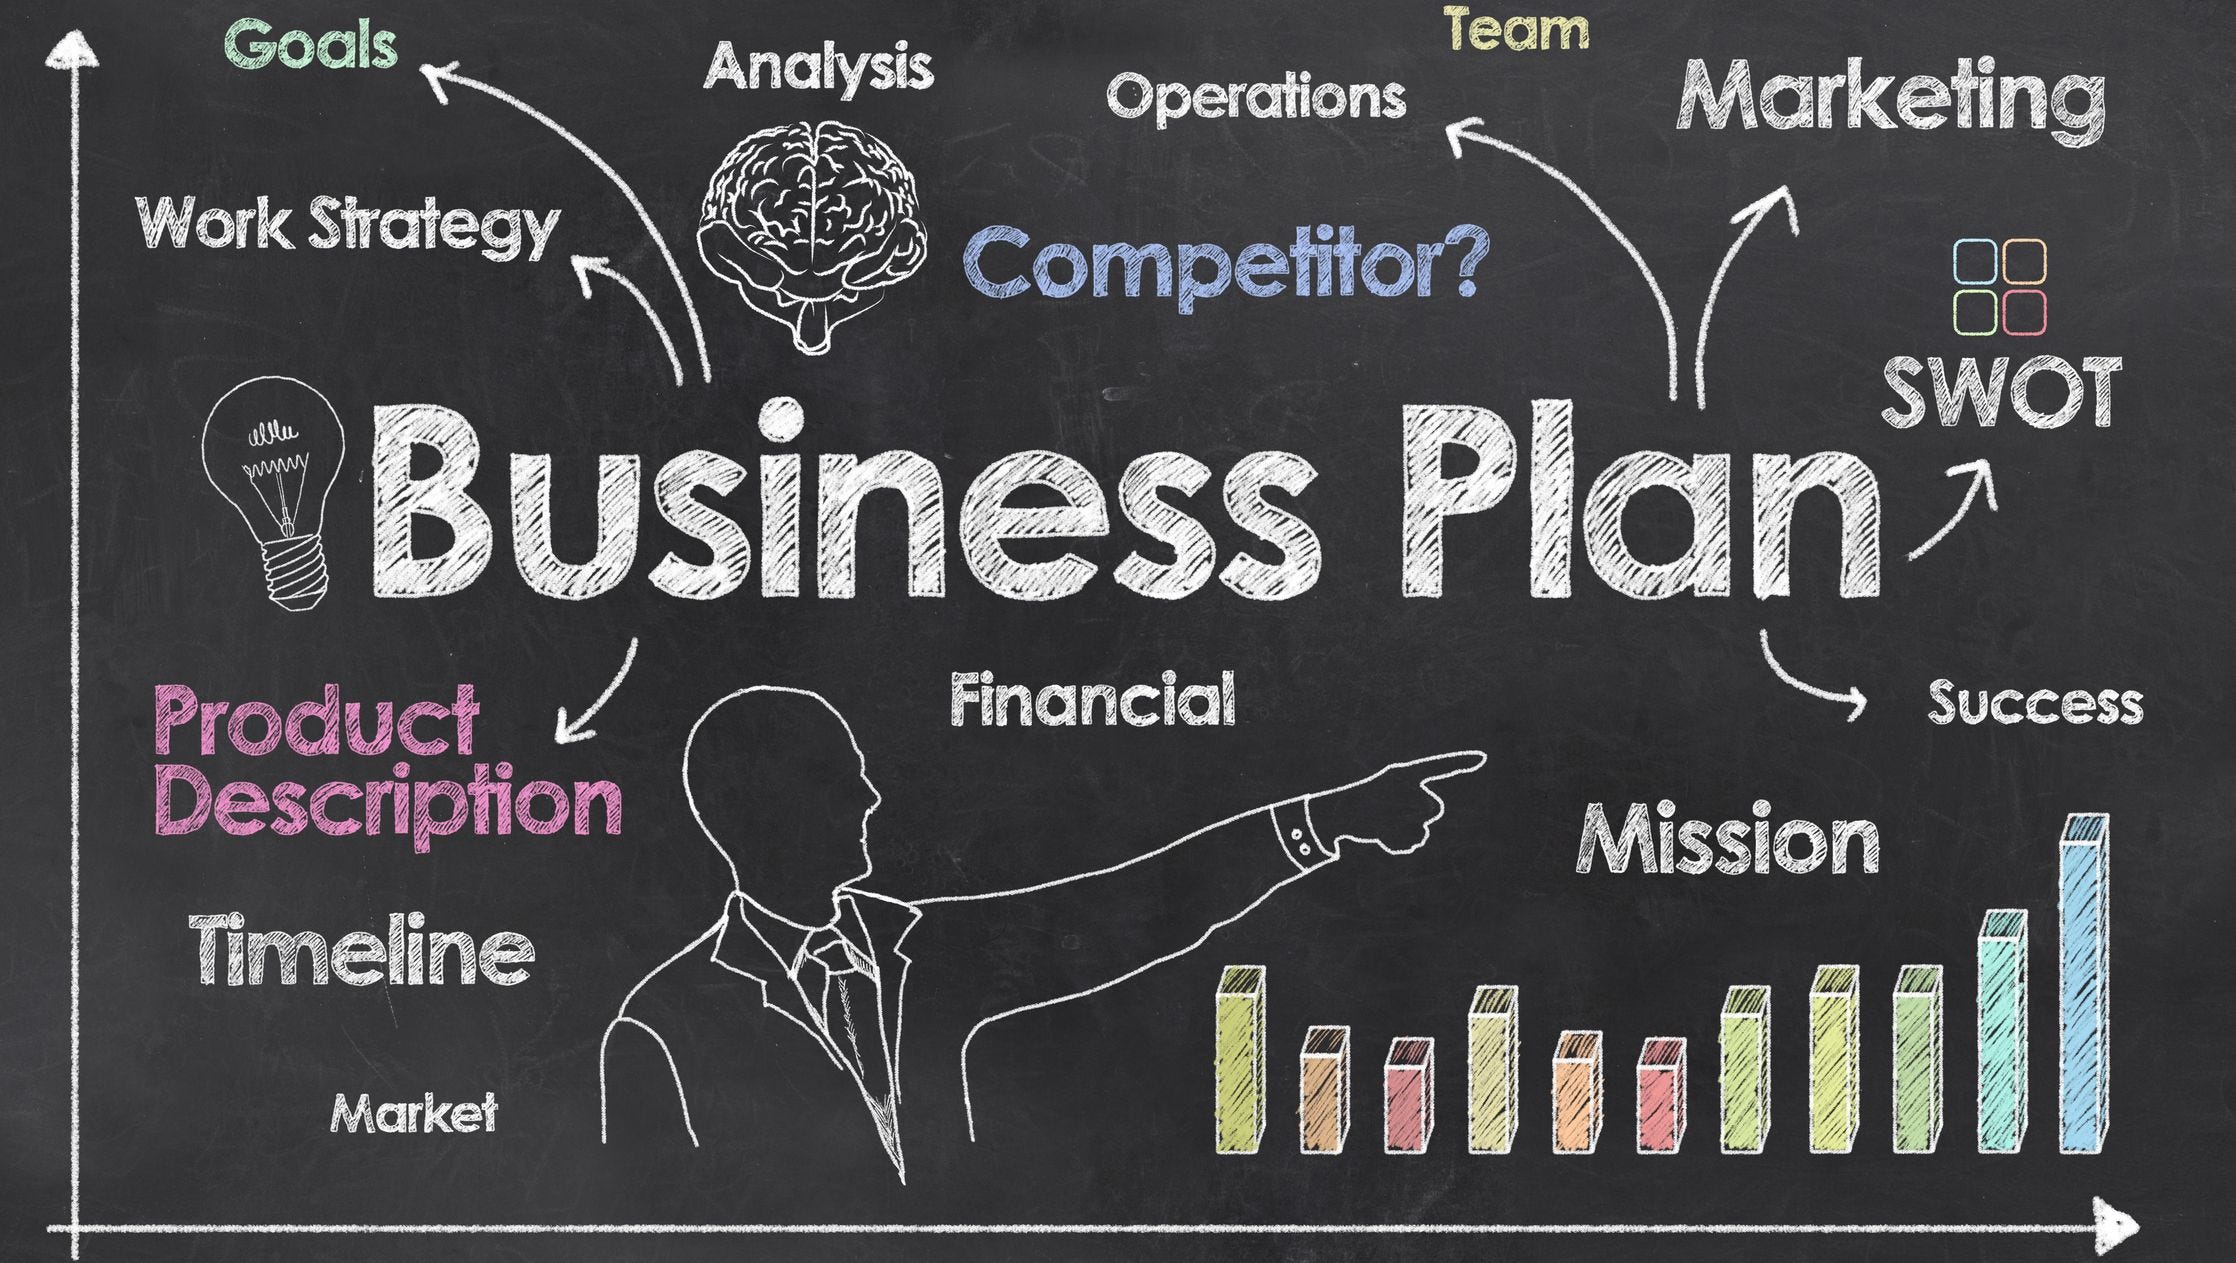 business plan is critical to